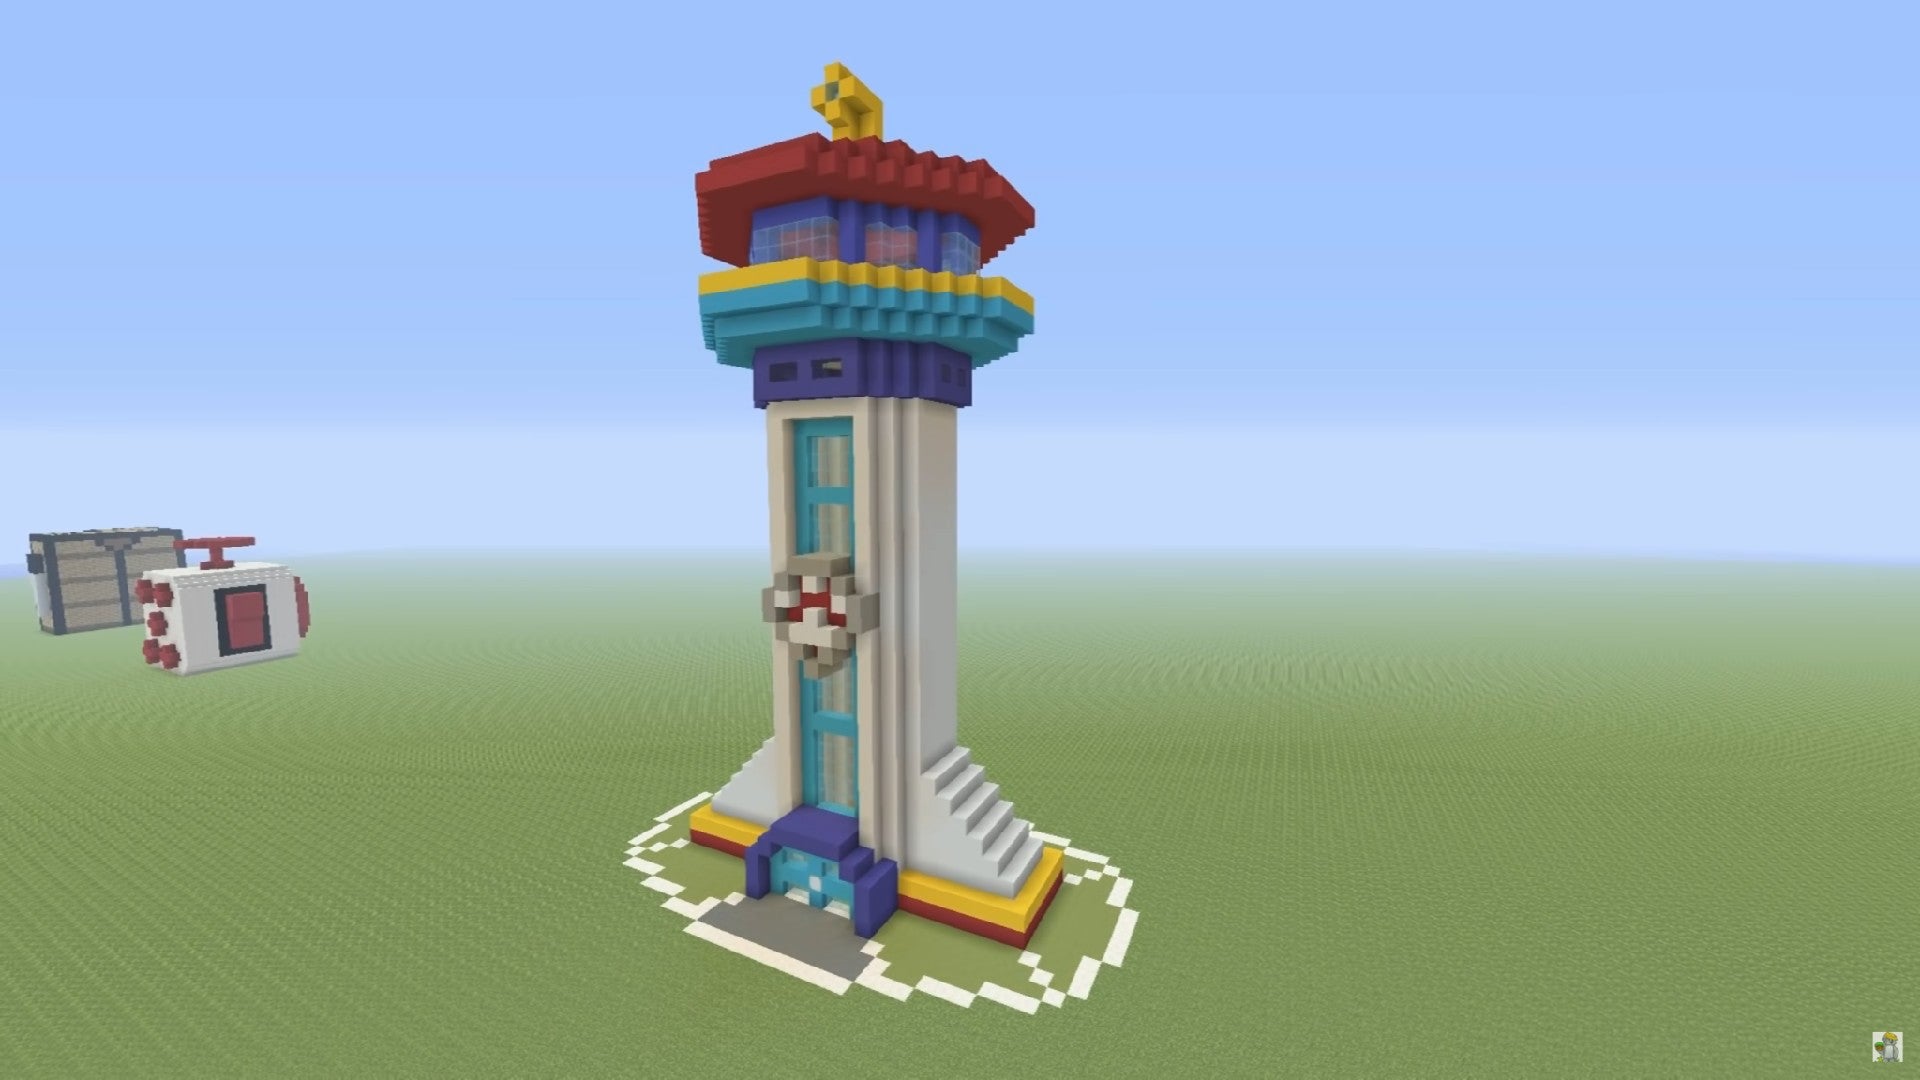 Paw Patrol headquarters tower built in Minecraft